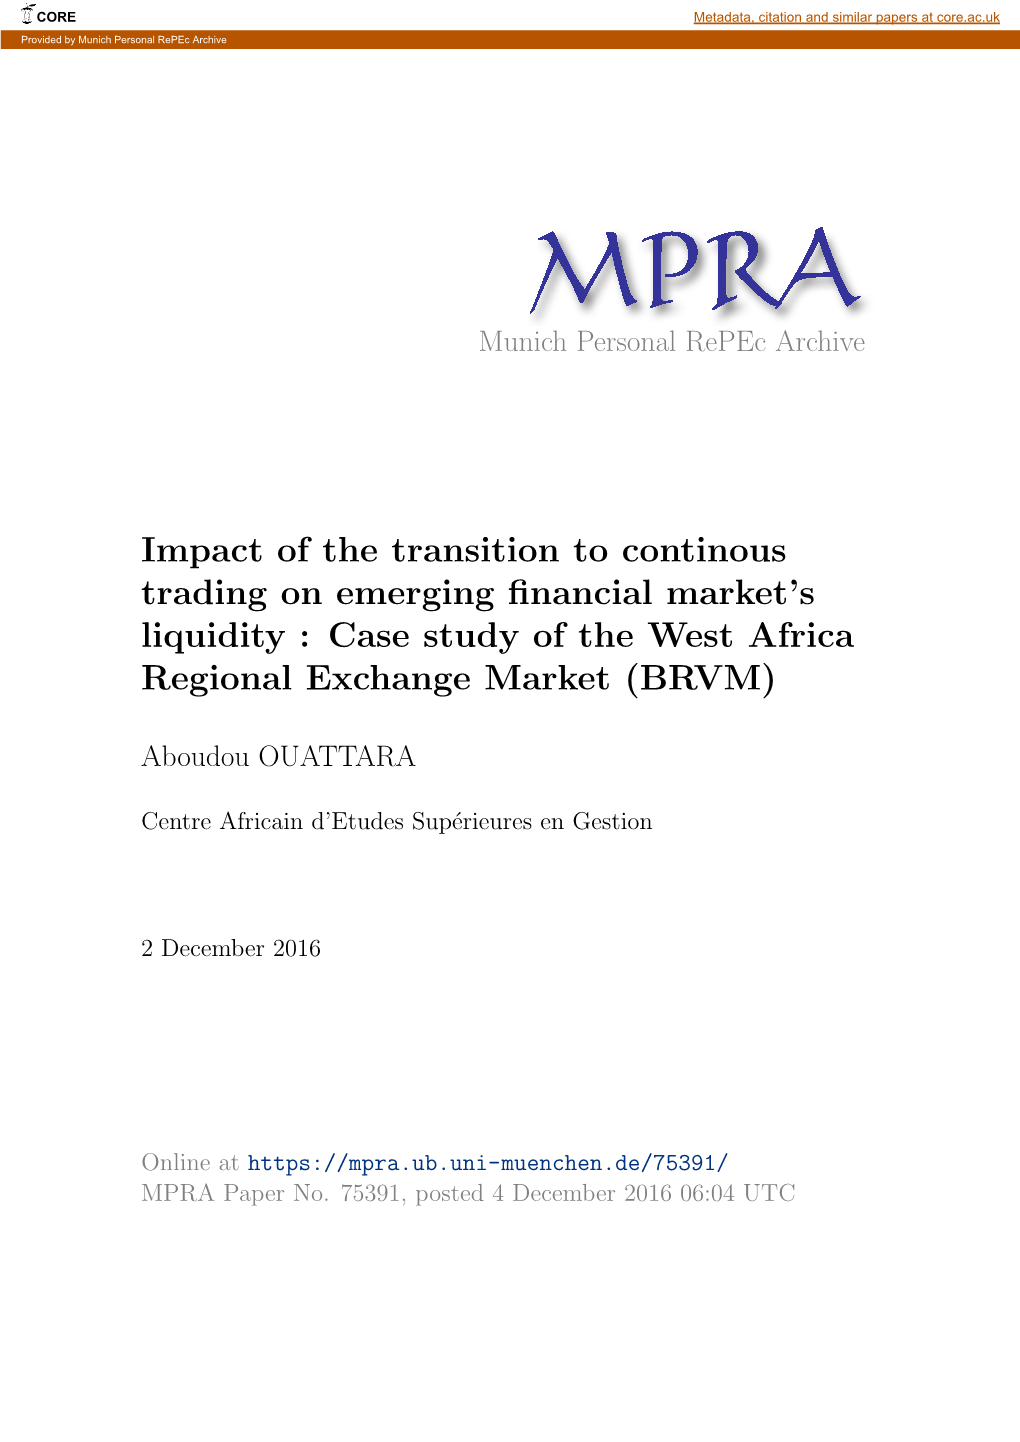 Impact of the Transition to Continous Trading on Emerging ﬁnancial Market’S Liquidity : Case Study of the West Africa Regional Exchange Market (BRVM)